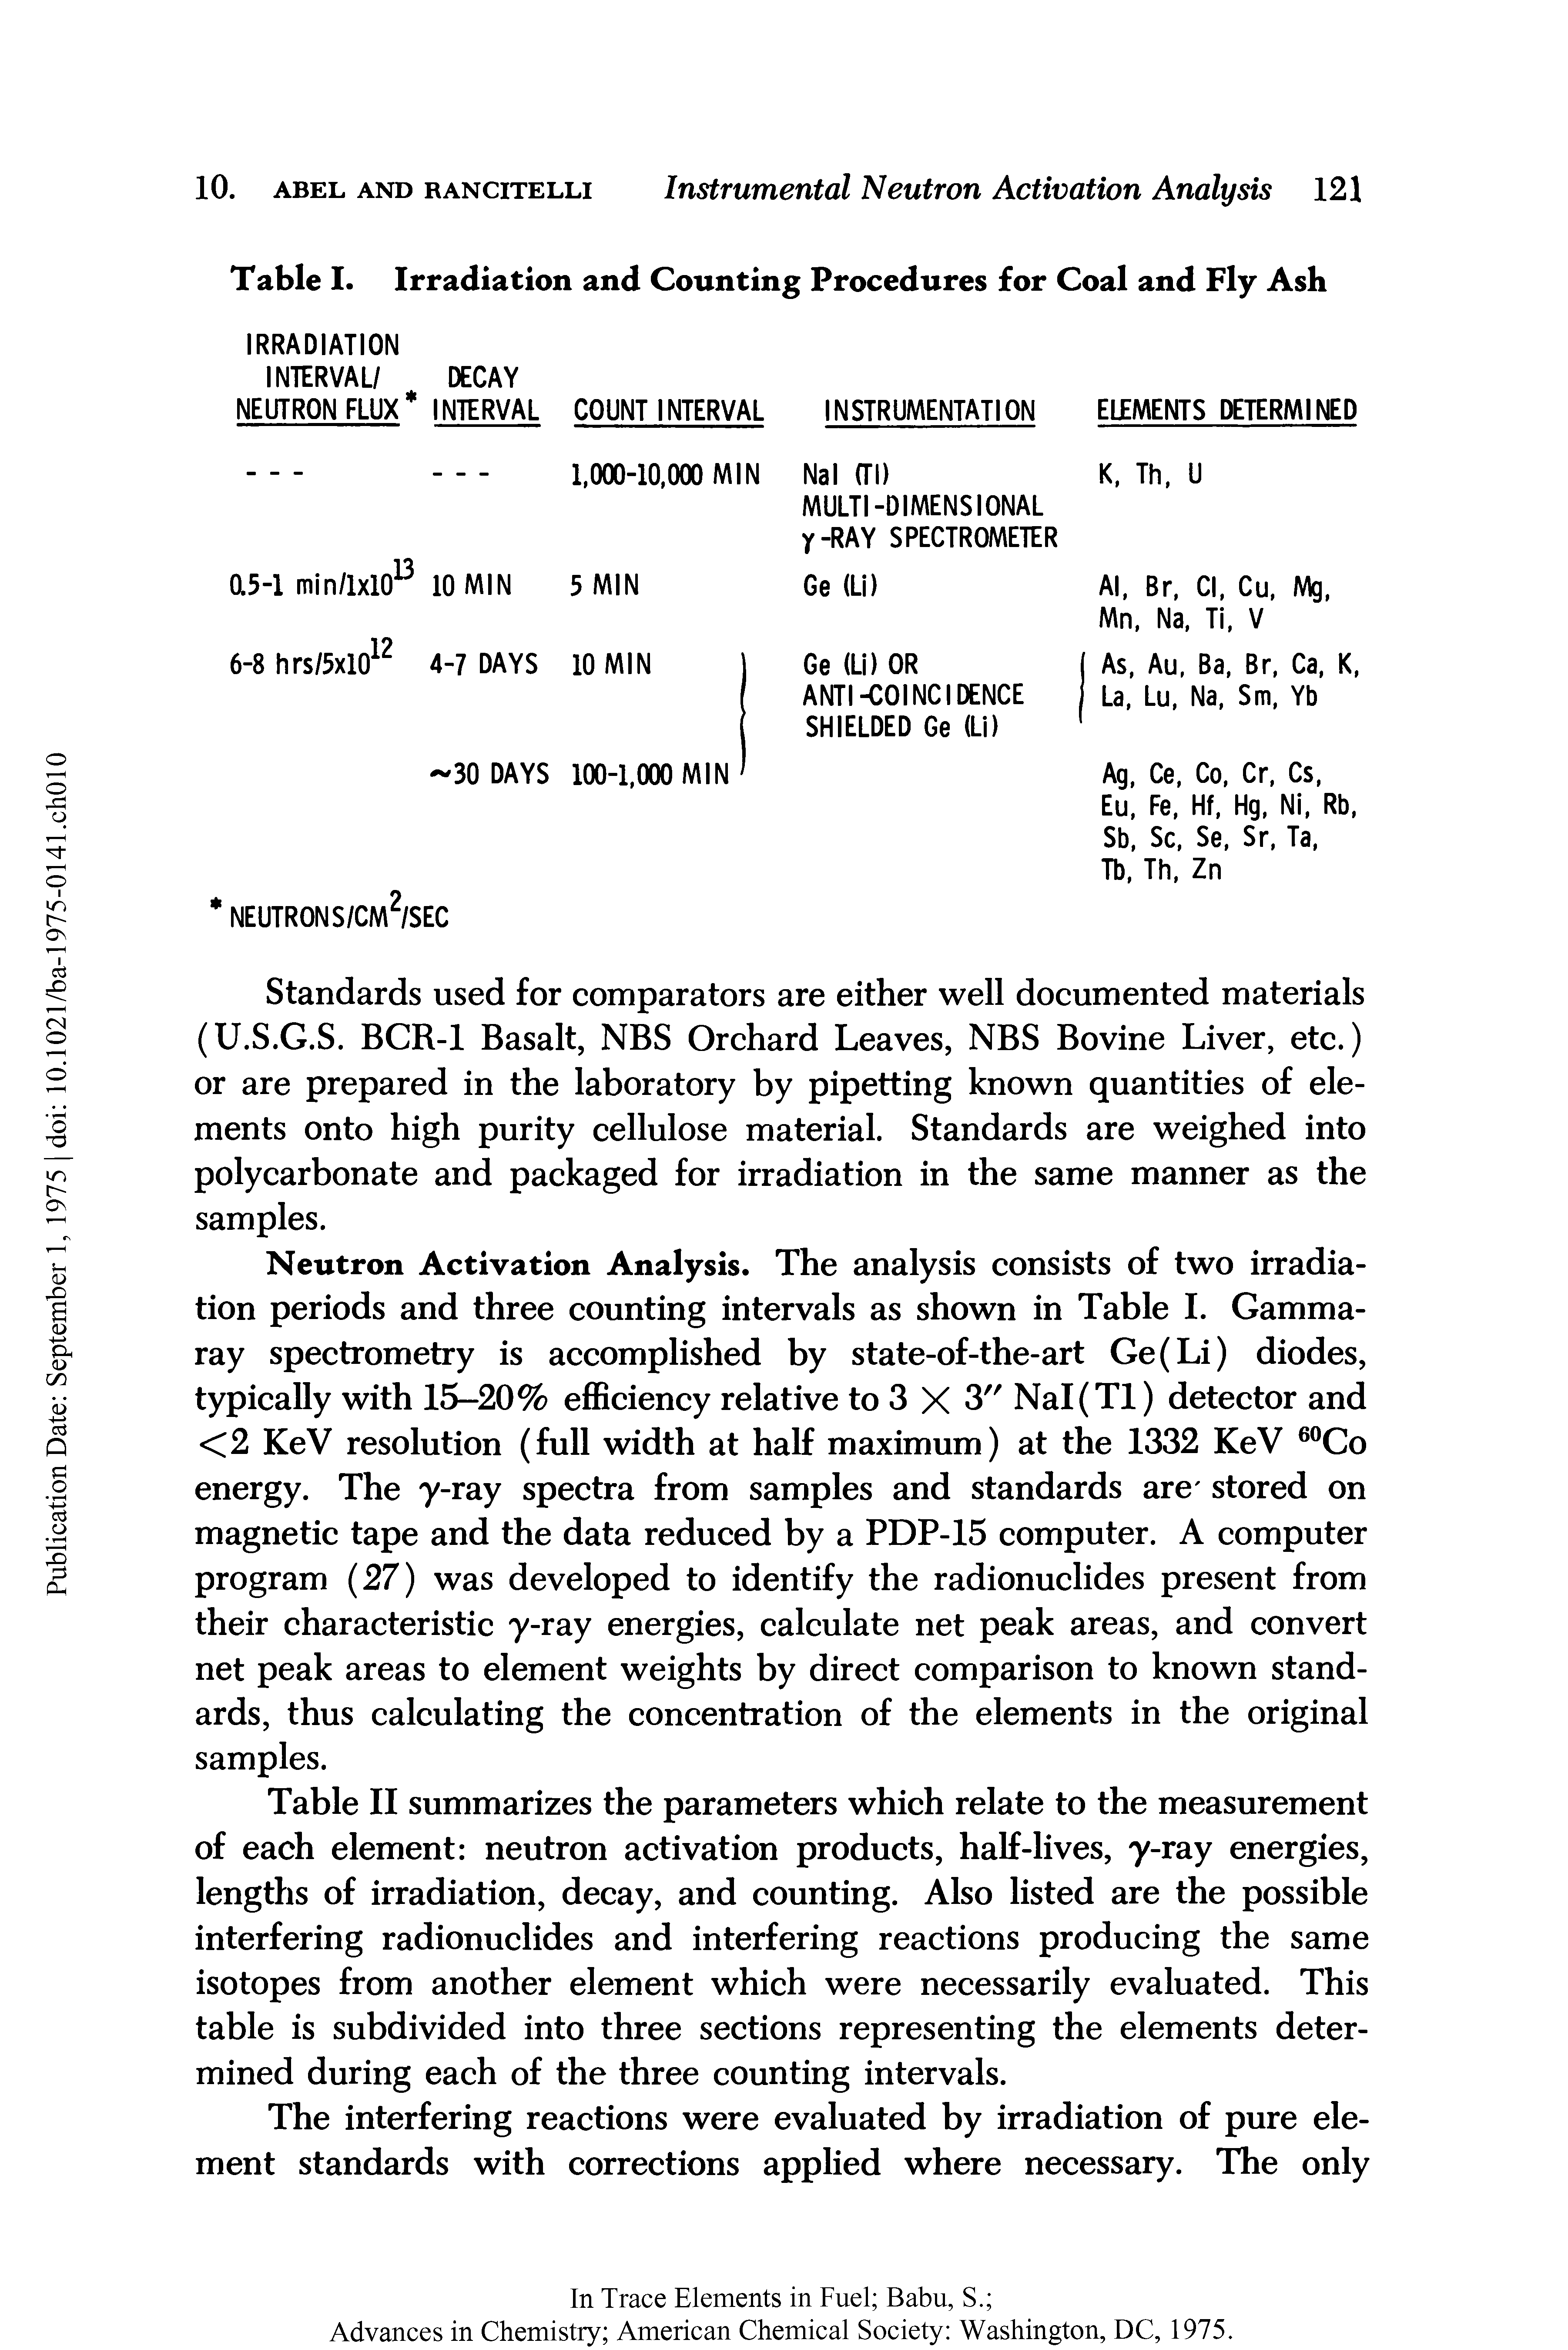 Table II summarizes the parameters which relate to the measurement of each element neutron activation products, half-lives, y-ray energies, lengths of irradiation, decay, and counting. Also listed are the possible interfering radionuclides and interfering reactions producing the same isotopes from another element which were necessarily evaluated. This table is subdivided into three sections representing the elements determined during each of the three counting intervals.